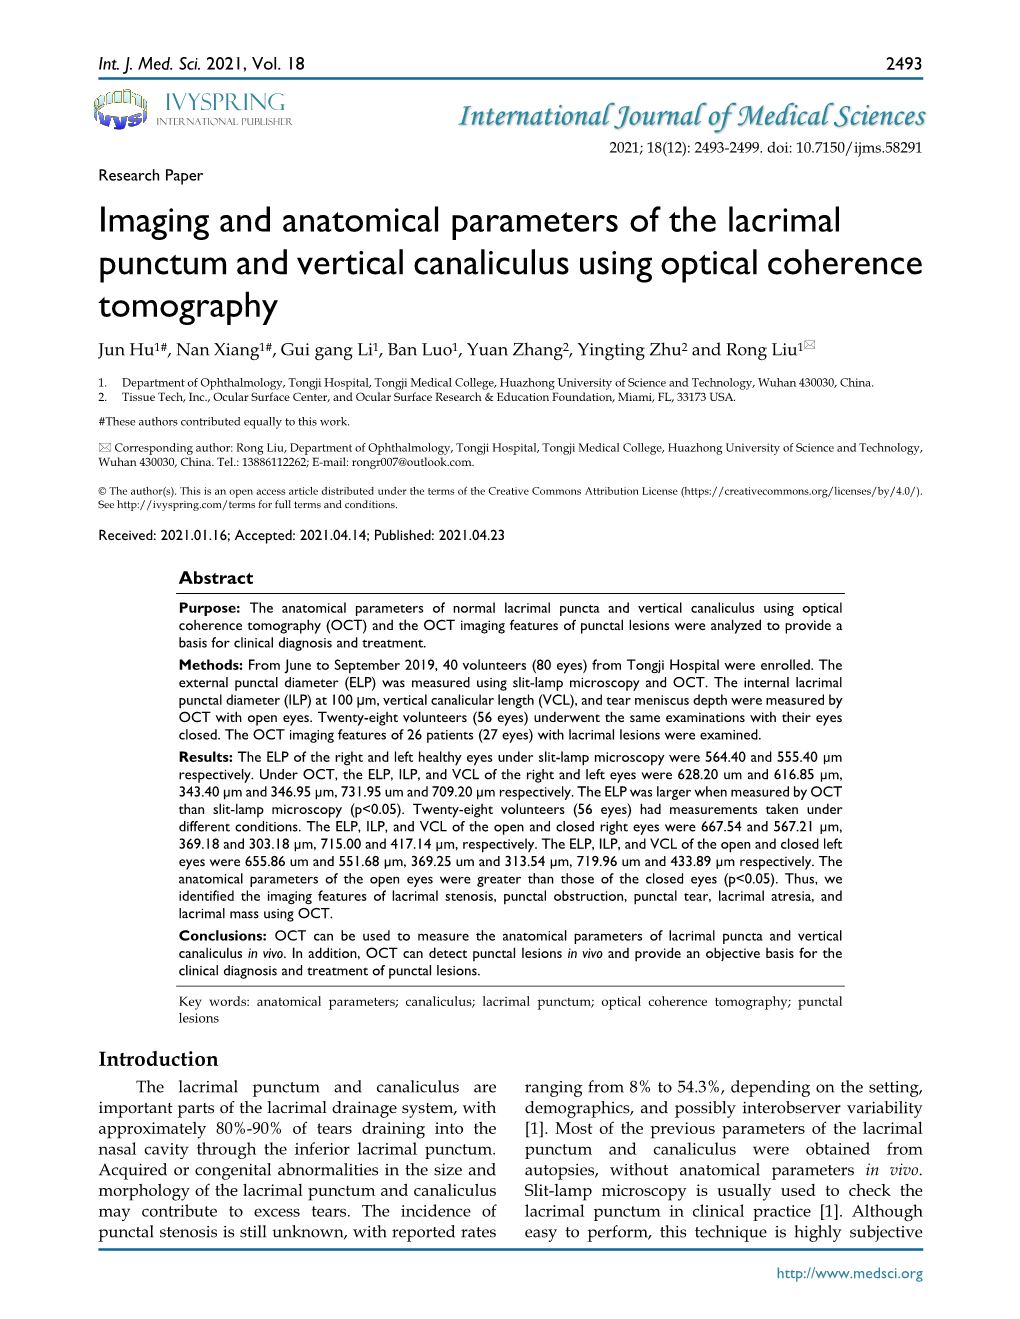 Imaging and Anatomical Parameters of the Lacrimal Punctum and Vertical